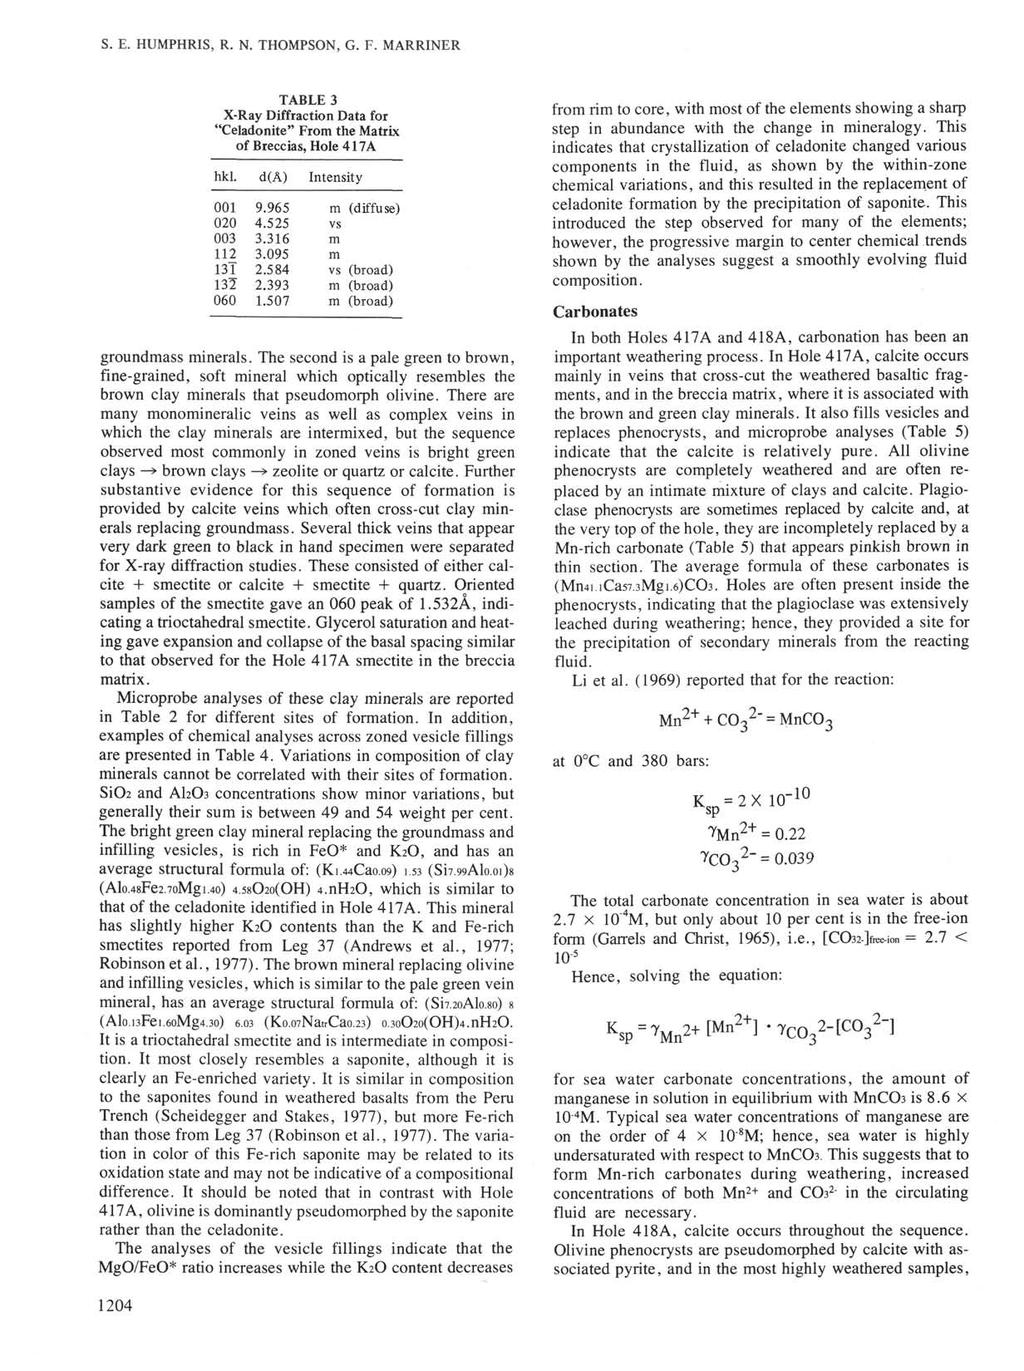 S. E. HUMPHRIS, R. N. THOMPSON, G. F. MARRINER TABLE 3 XRay Diffraction Data for "Celadonite" From the Matrix of Breccias, Hole 7A hkl. 00 00 003 3 3 060 d(a) 9.965.55 3.36 3.095.58.393.